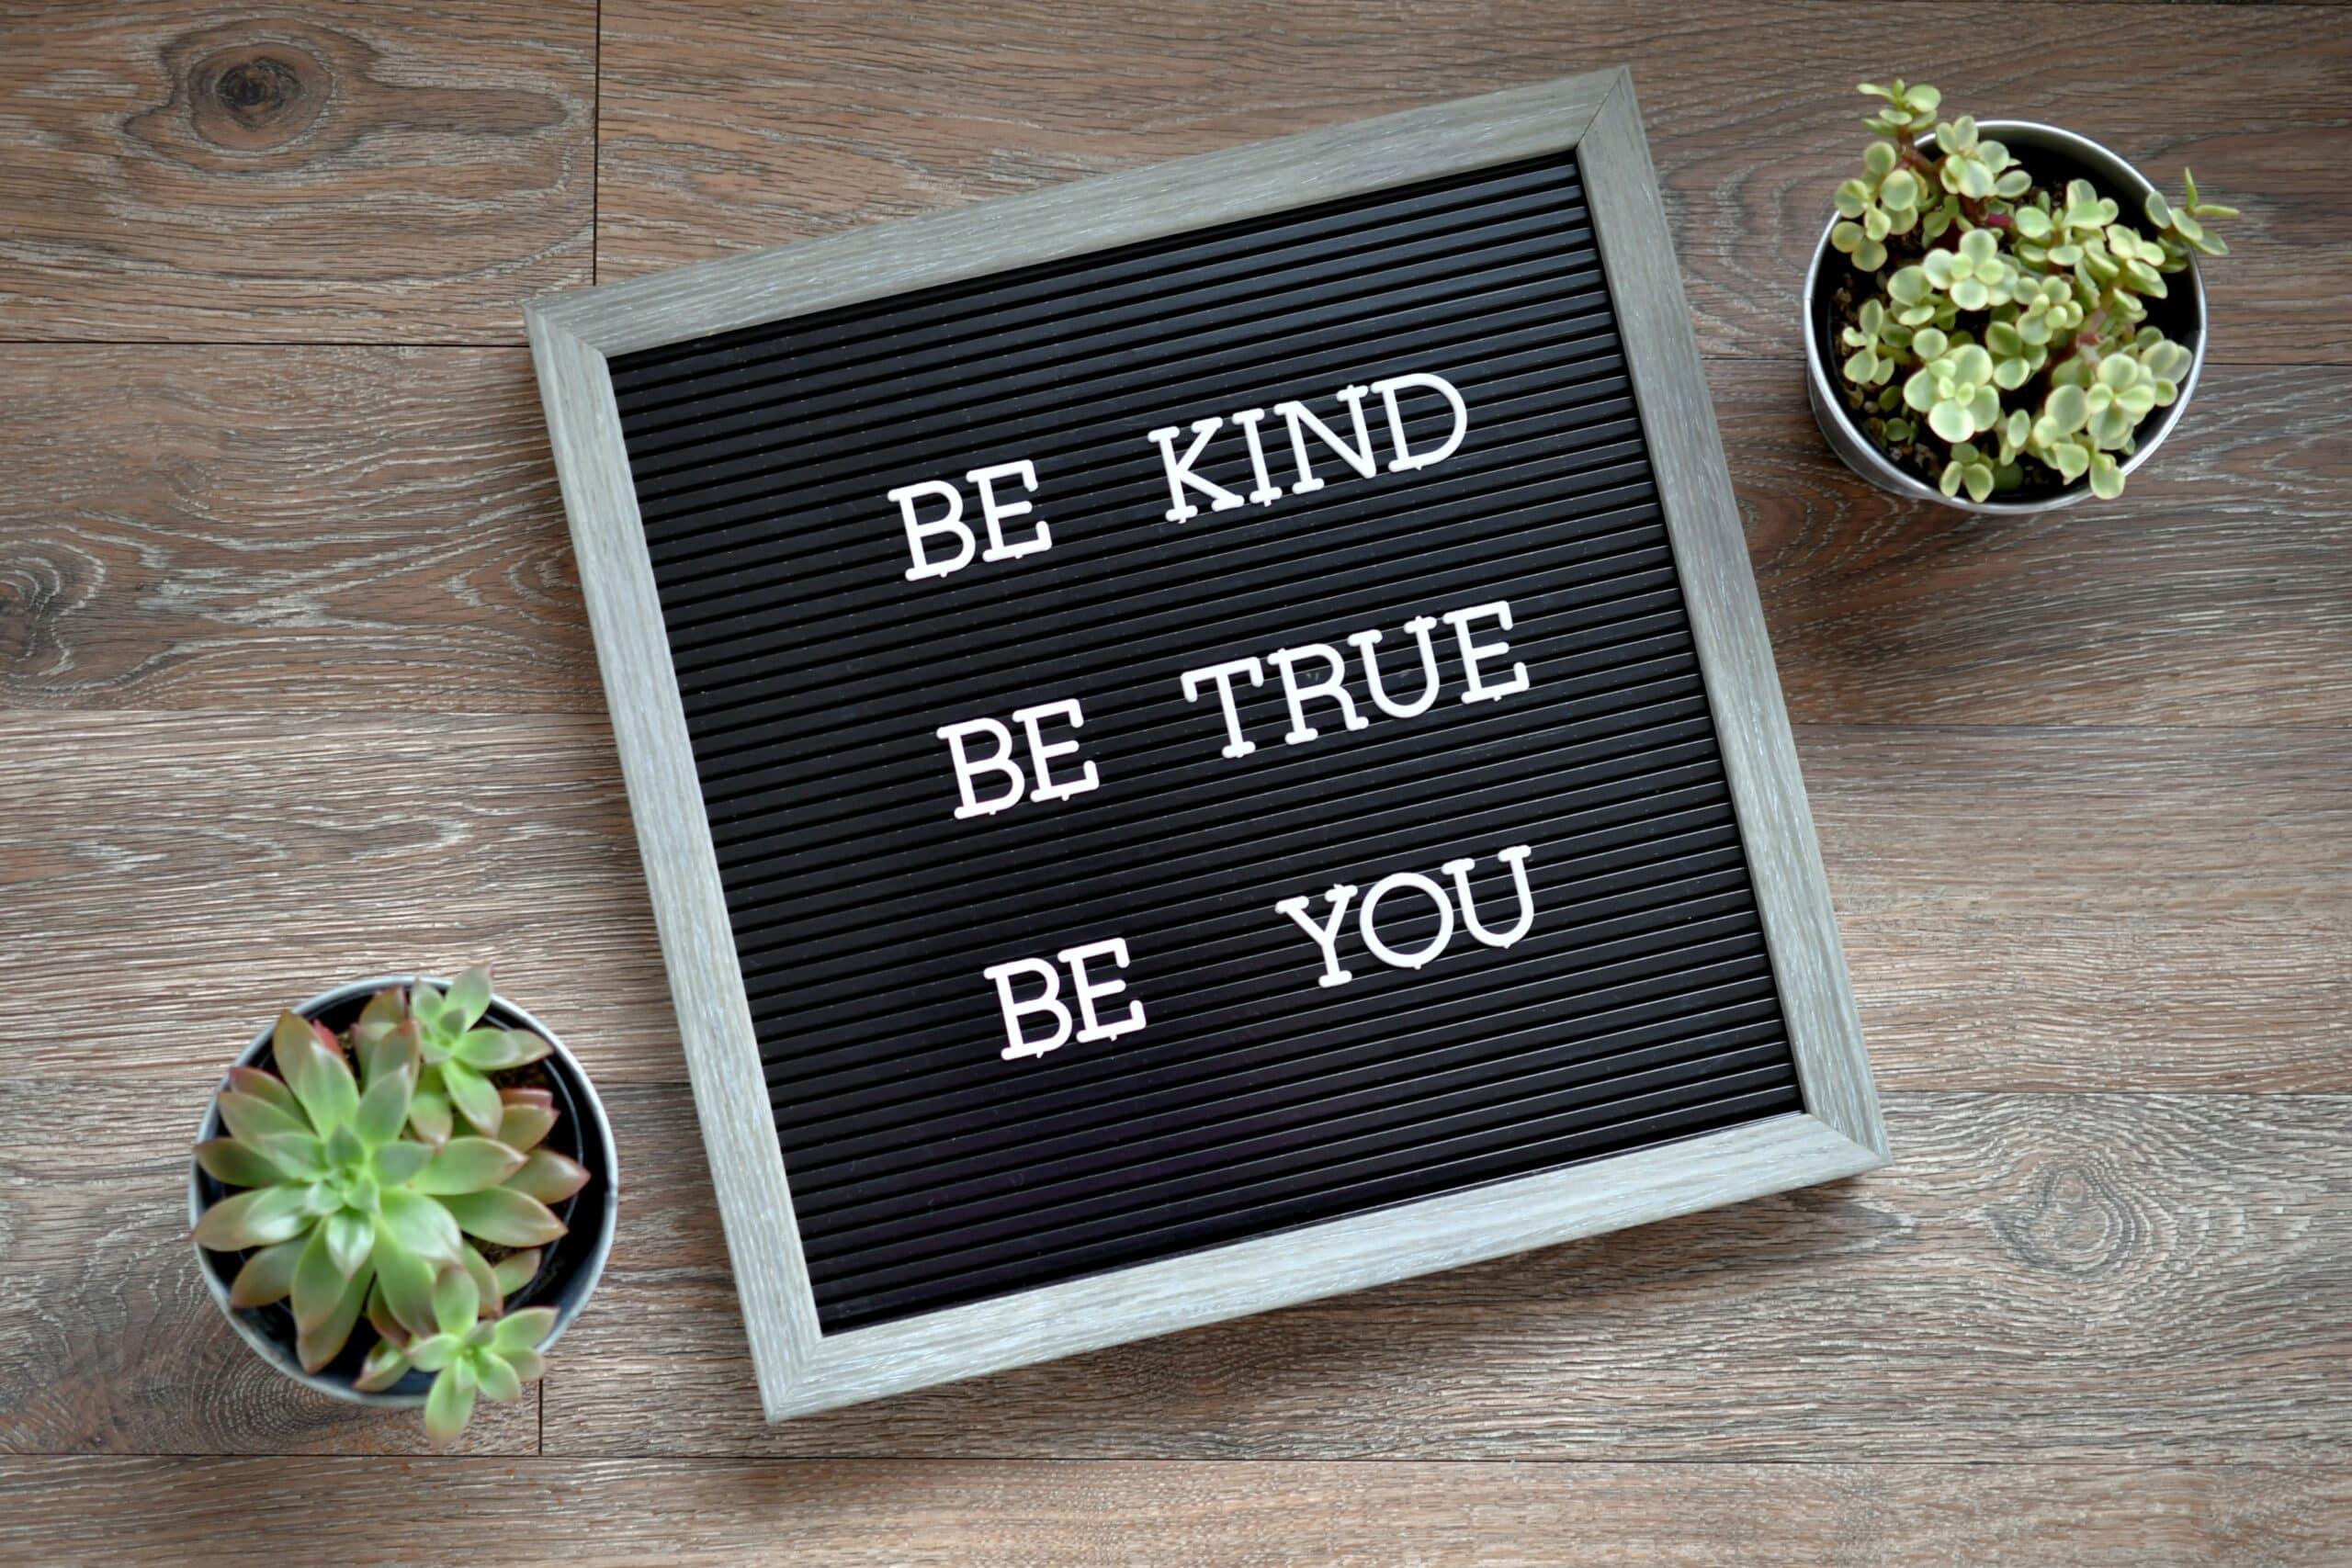 Be Kind, Be True, Be You message board sign with succulent plants